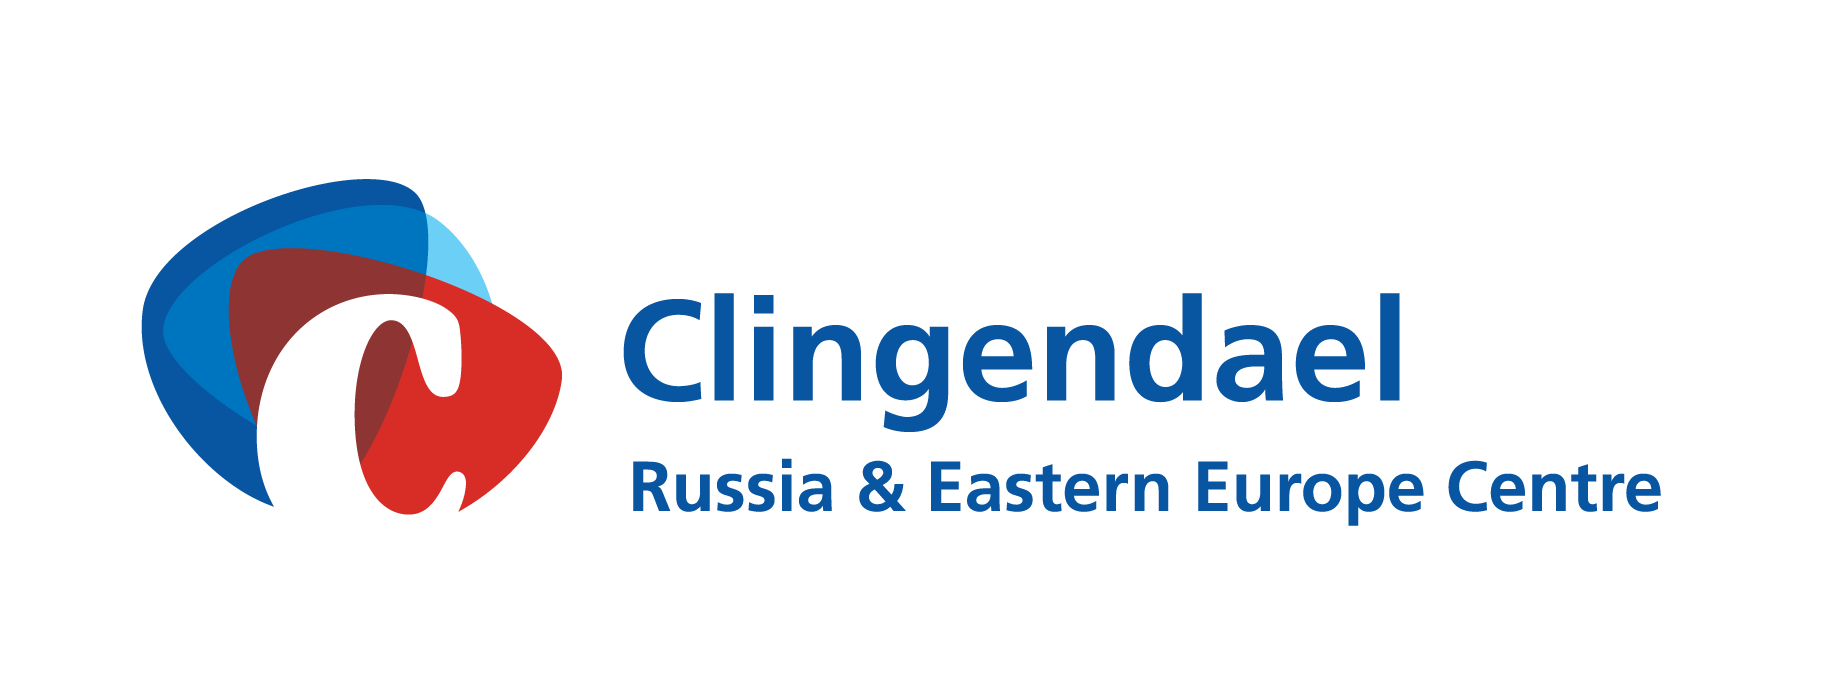 Clingendael Russia and Eastern Europe Centre